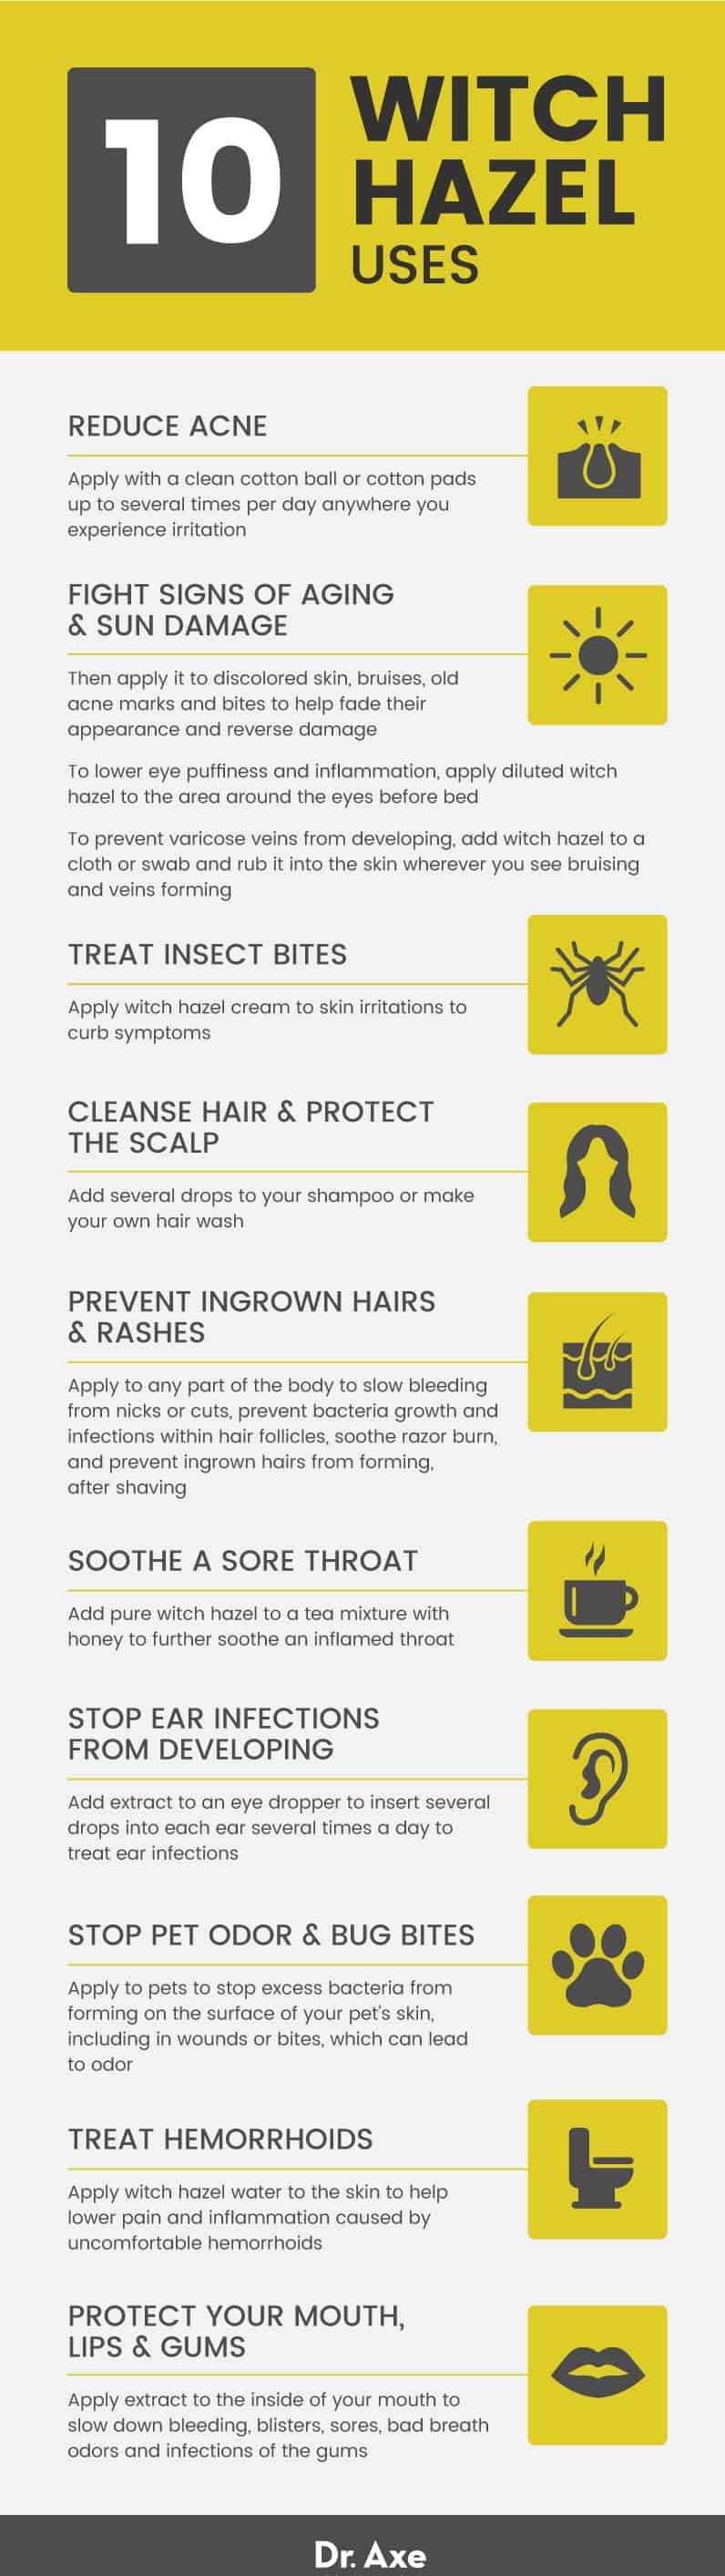 Witch hazel uses - Dr. Axe